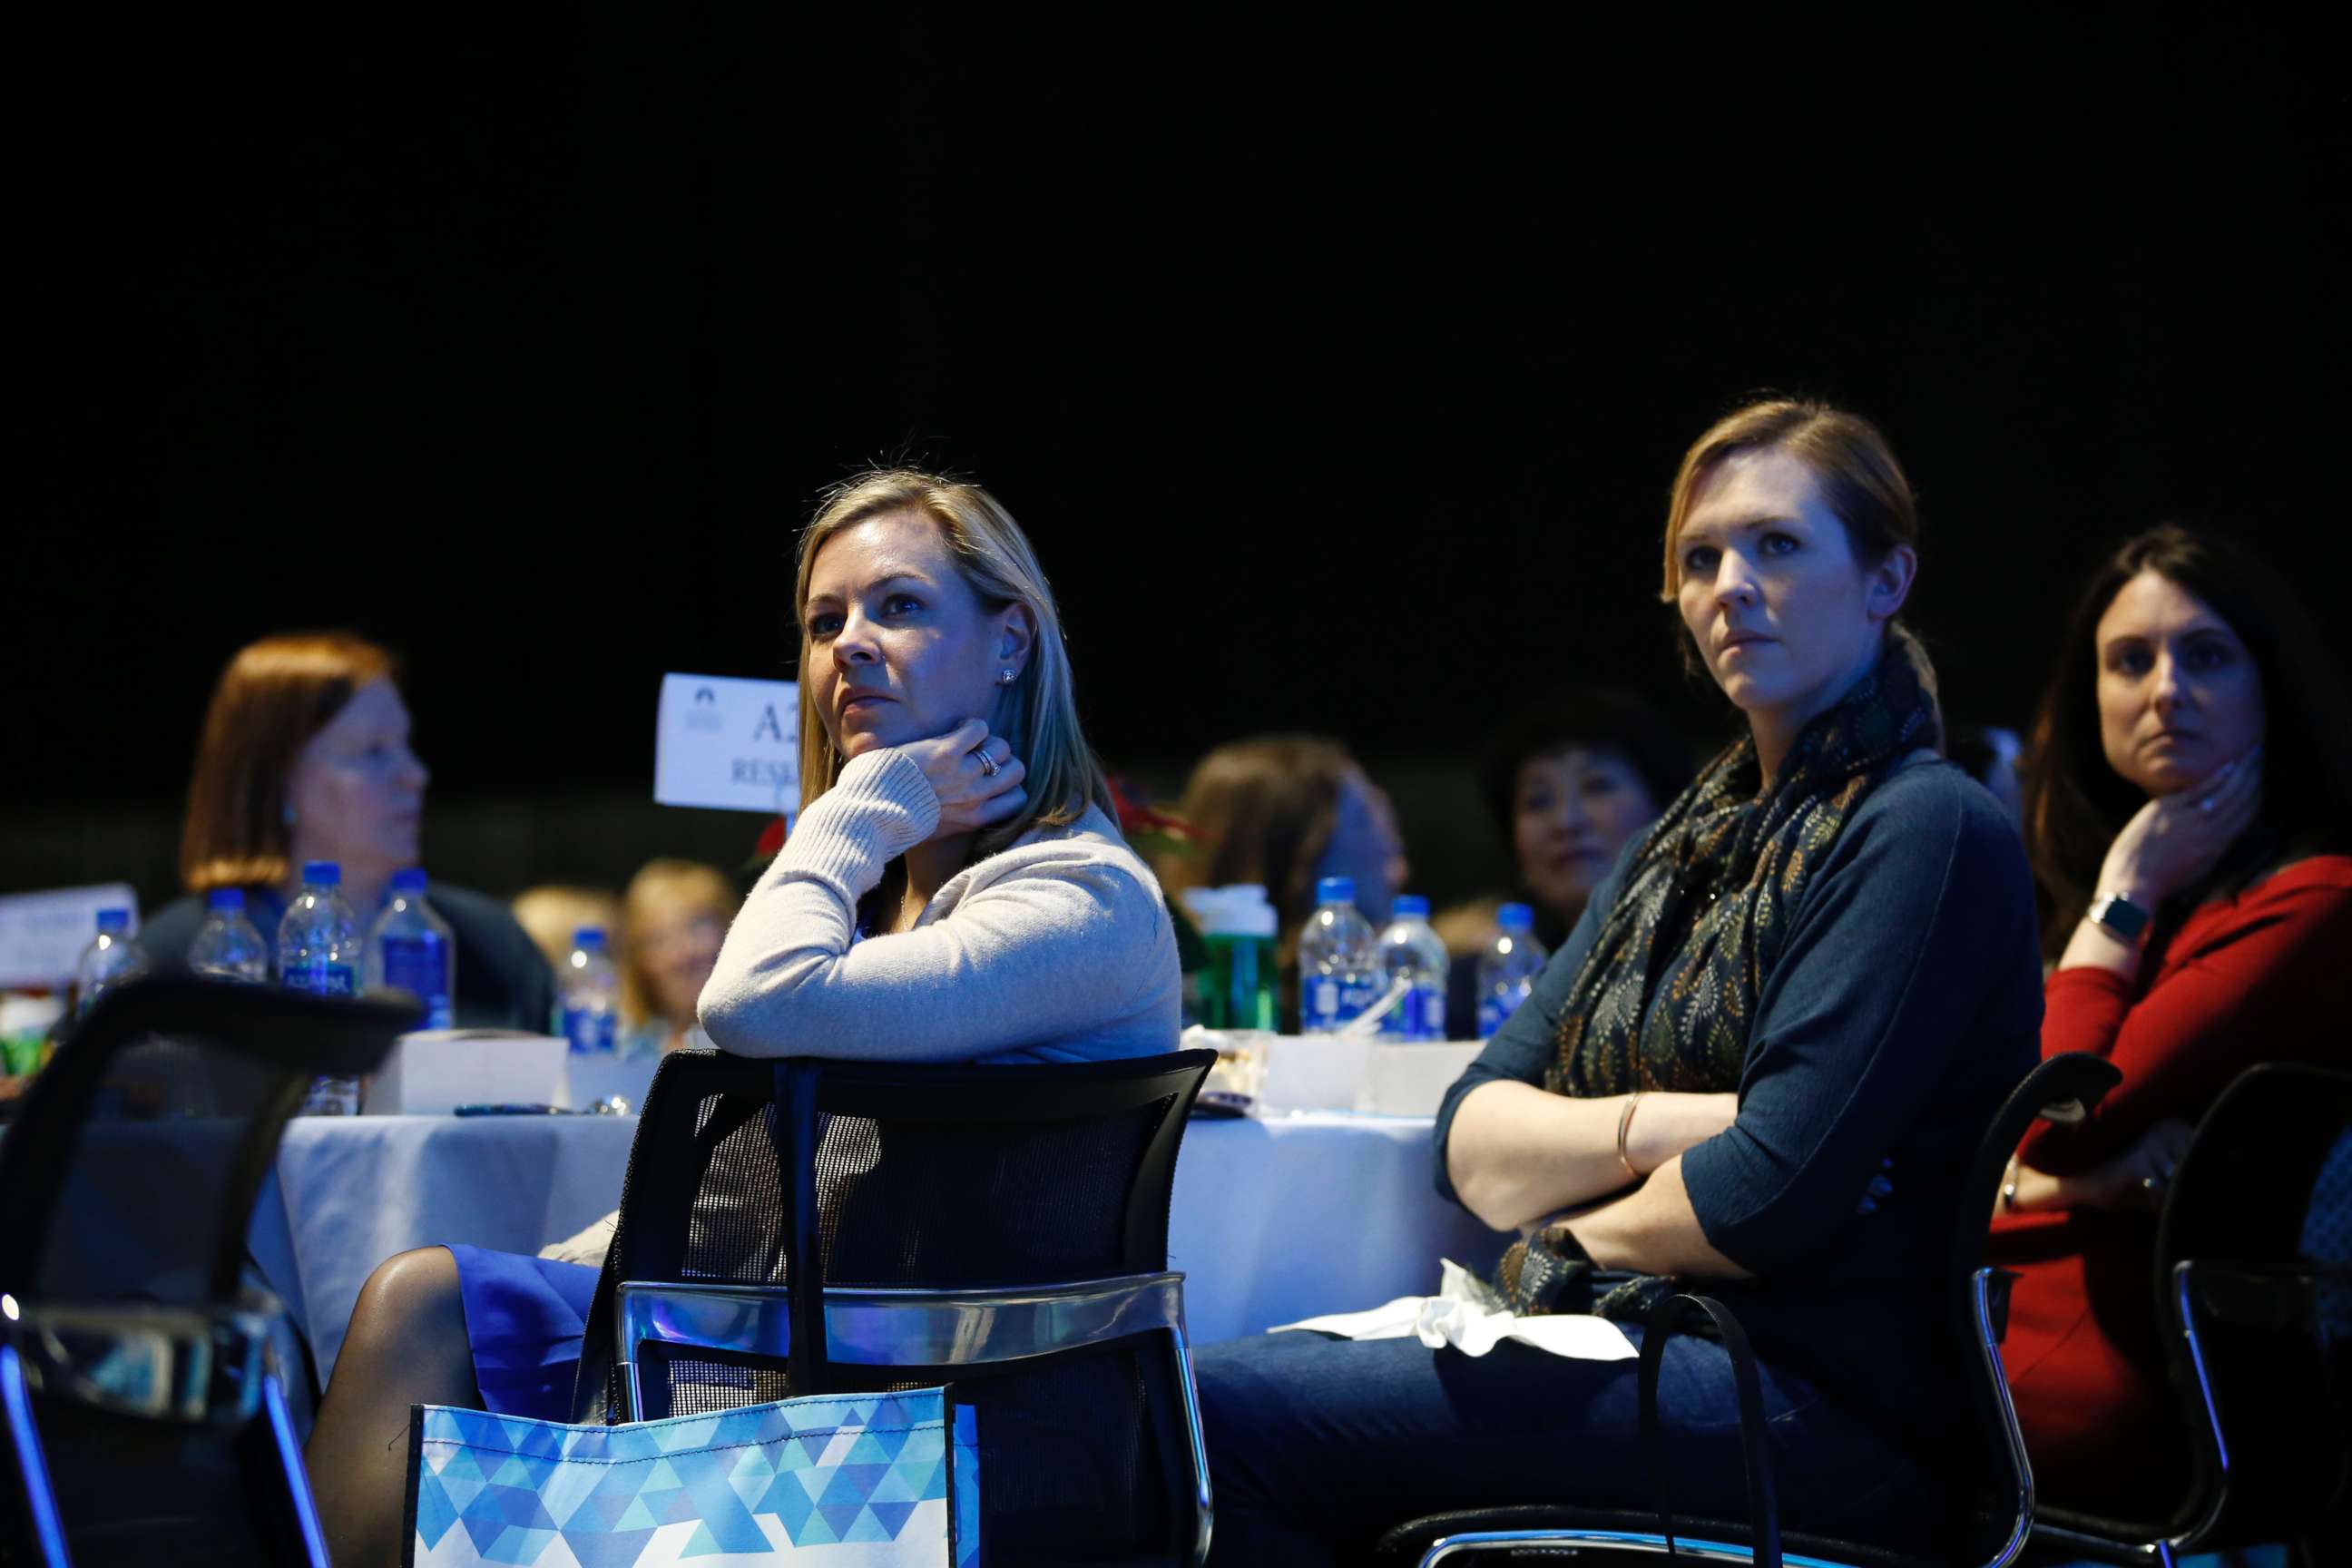 PHOTO: Audience reacts during 2018 Massachusetts Conference for Women at Boston Convention Center, Dec. 6, 2018.